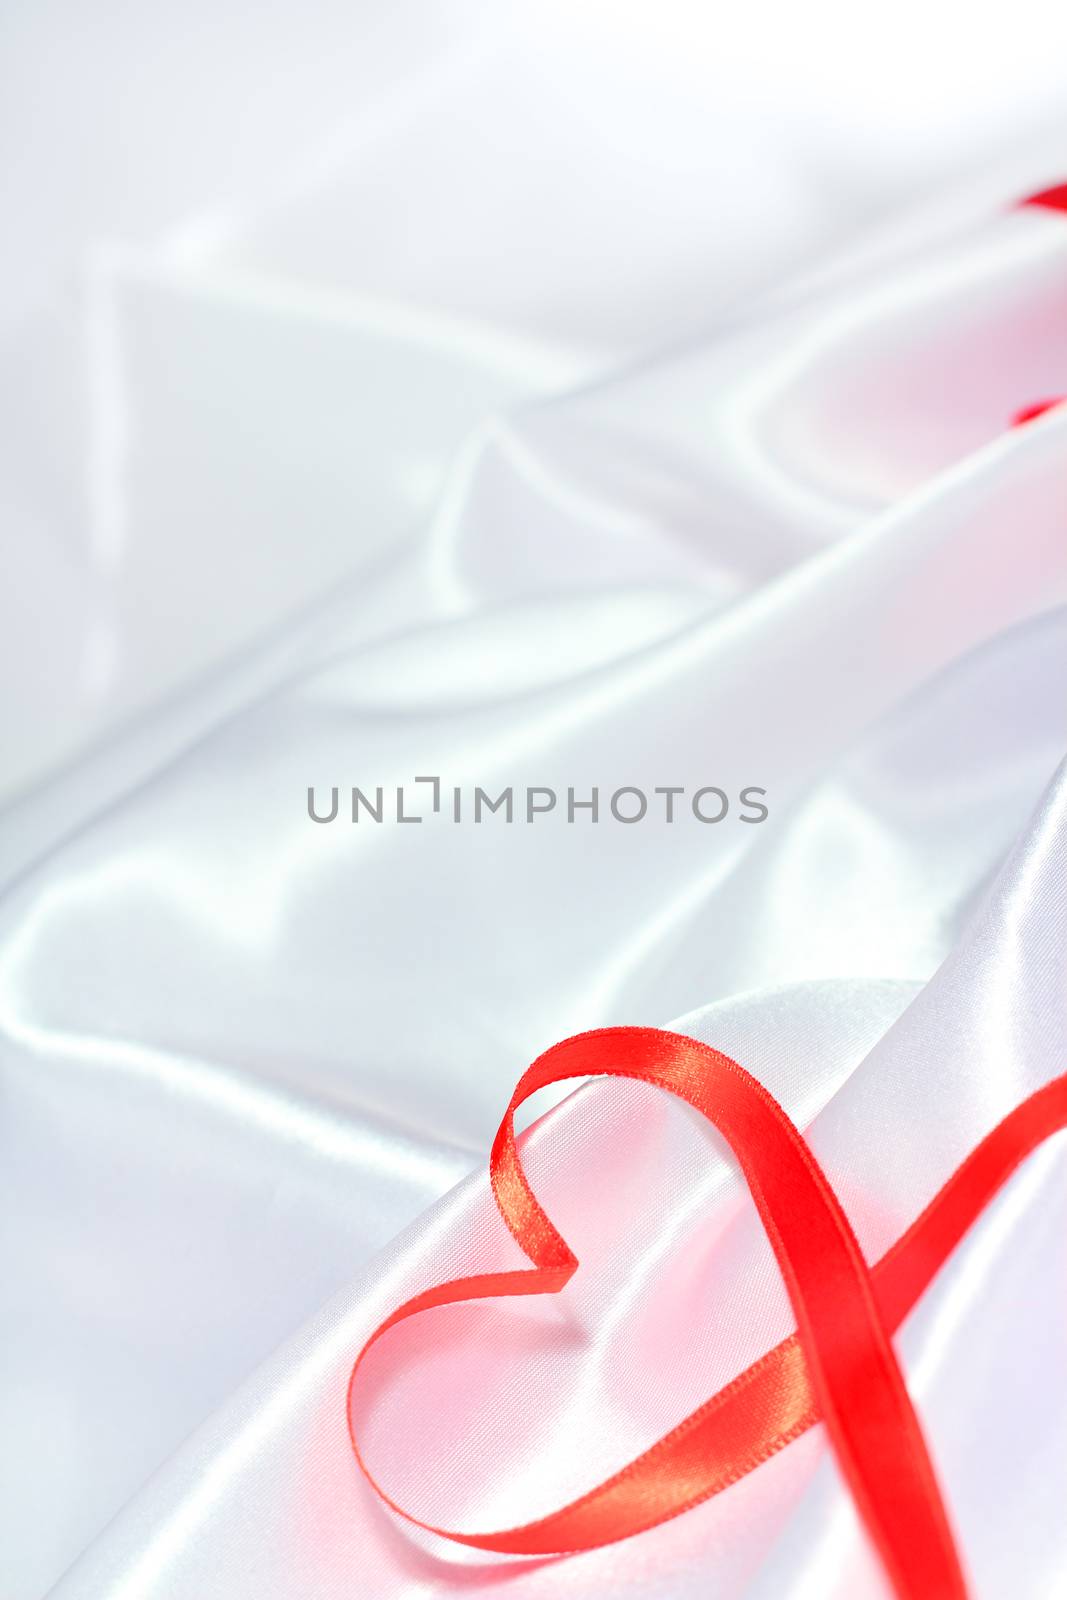 Red satin glossy ribbon heart over white silk background